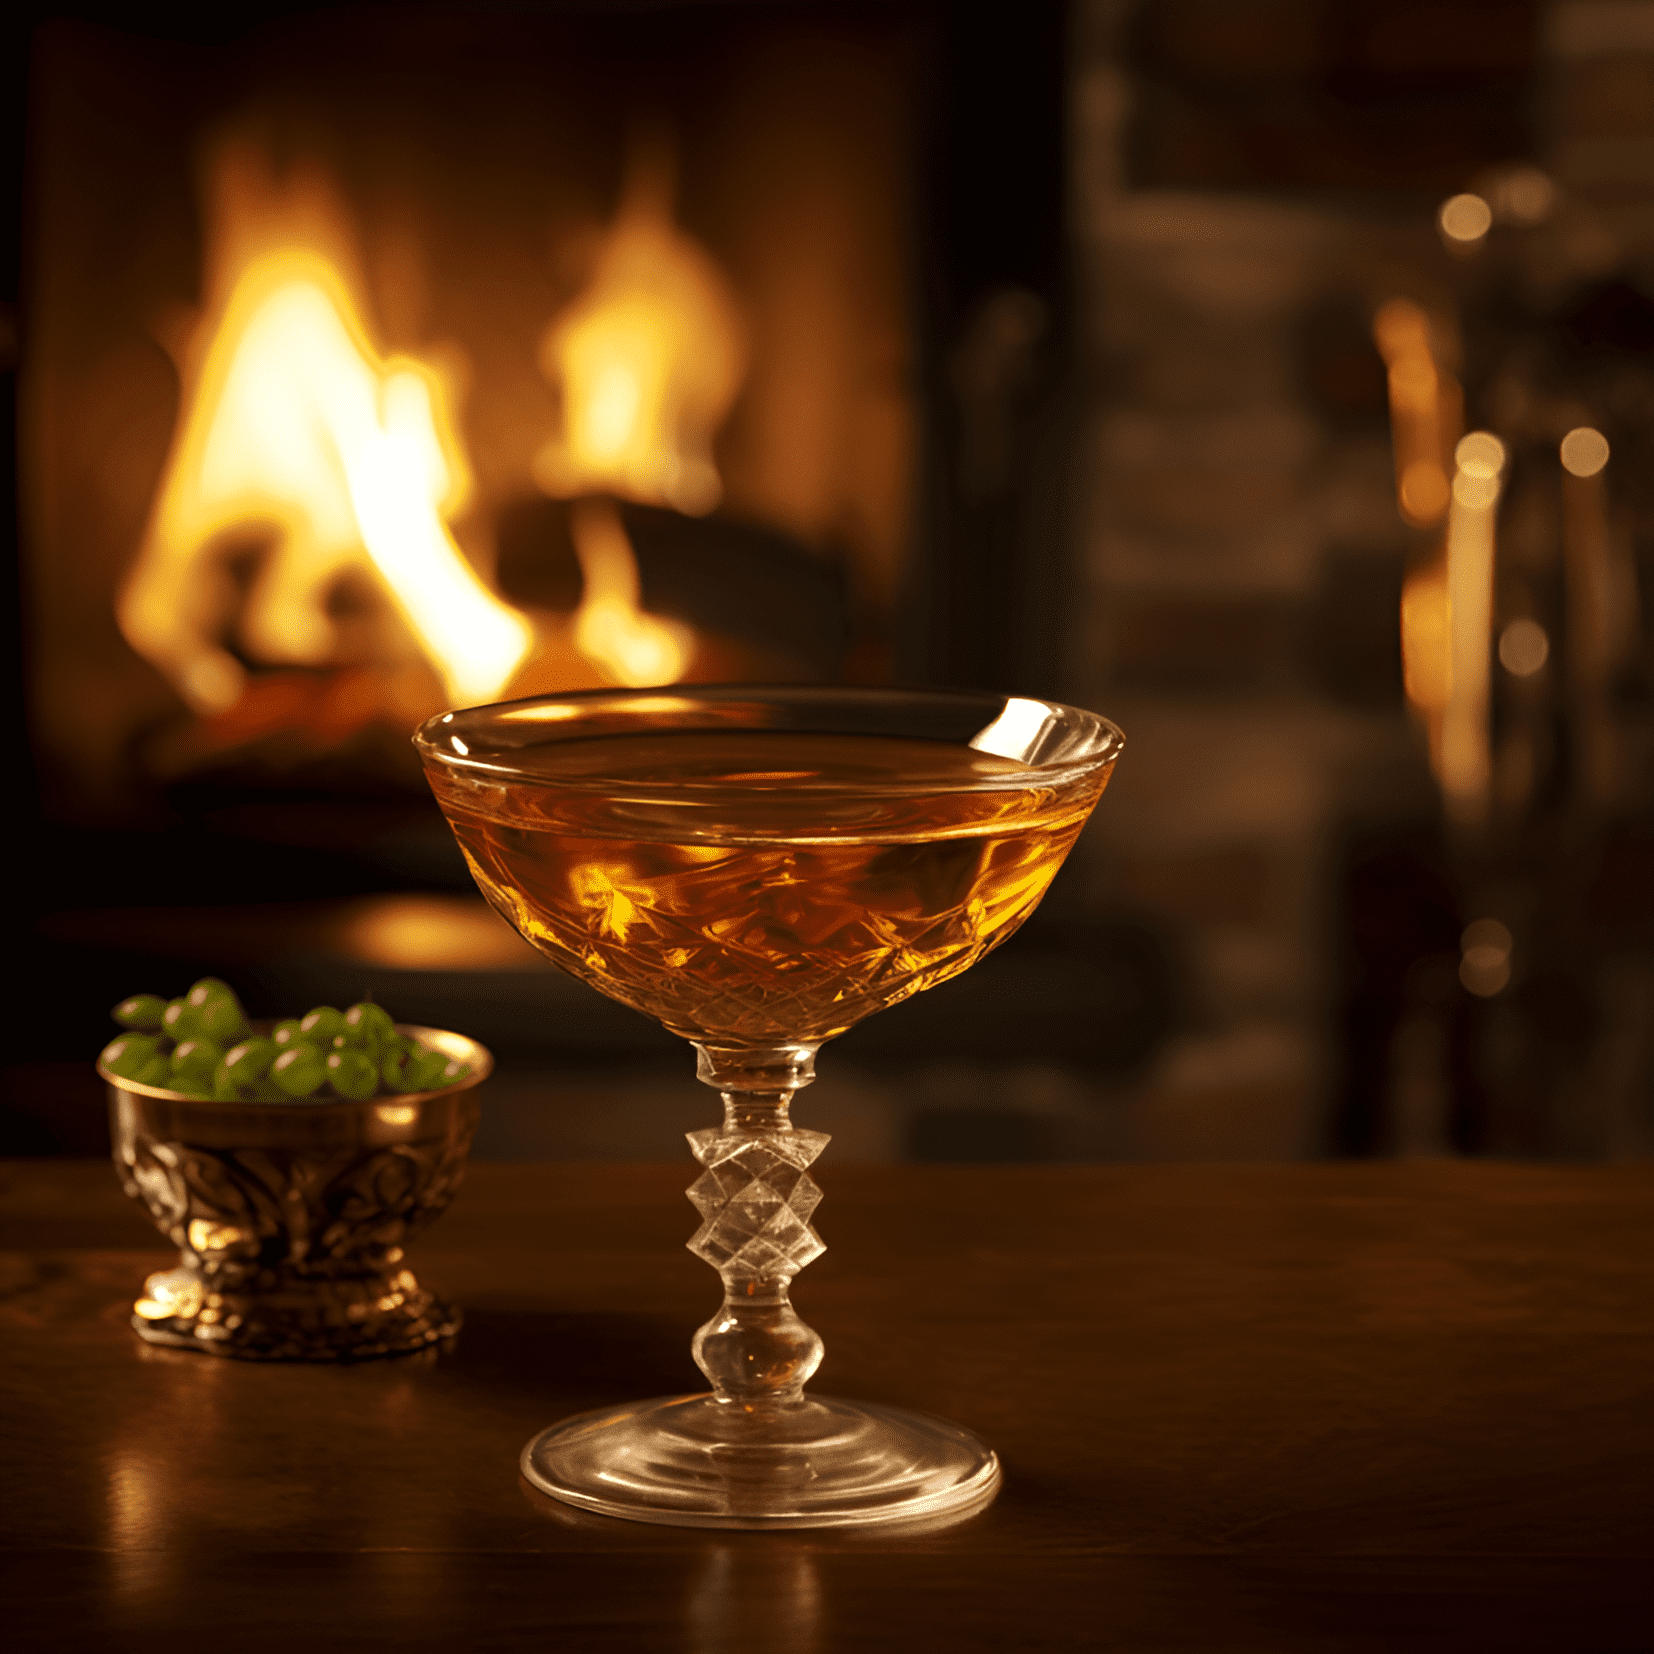 Widow's Kiss Cocktail Recipe - The Widow's Kiss is a complex, herbal, and slightly sweet cocktail with a rich, warming taste. It has a smooth, velvety texture and a long, lingering finish.